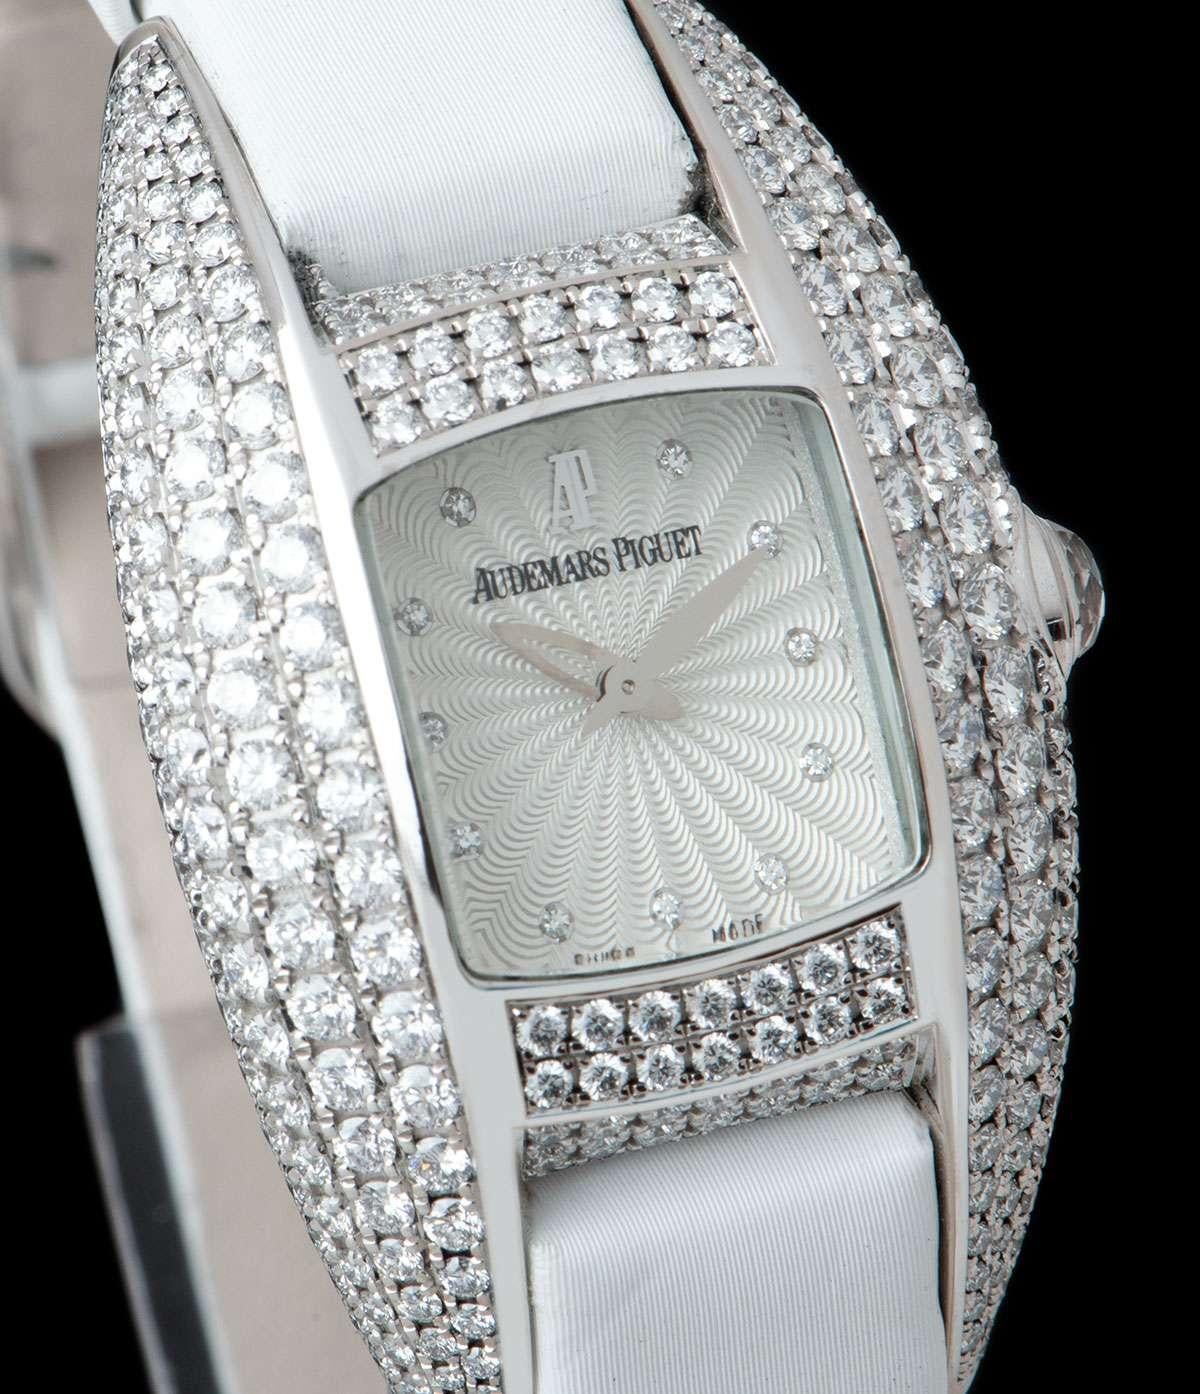 An 18k White Gold Dream Ladies Wristwatch 67496BC.ZZ.A011SU.01, silver guilloche dial with 11 applied round brilliant cut diamond hour markers, a fixed 18k white gold bezel and 18k white gold case set with a total of approximately 260 round